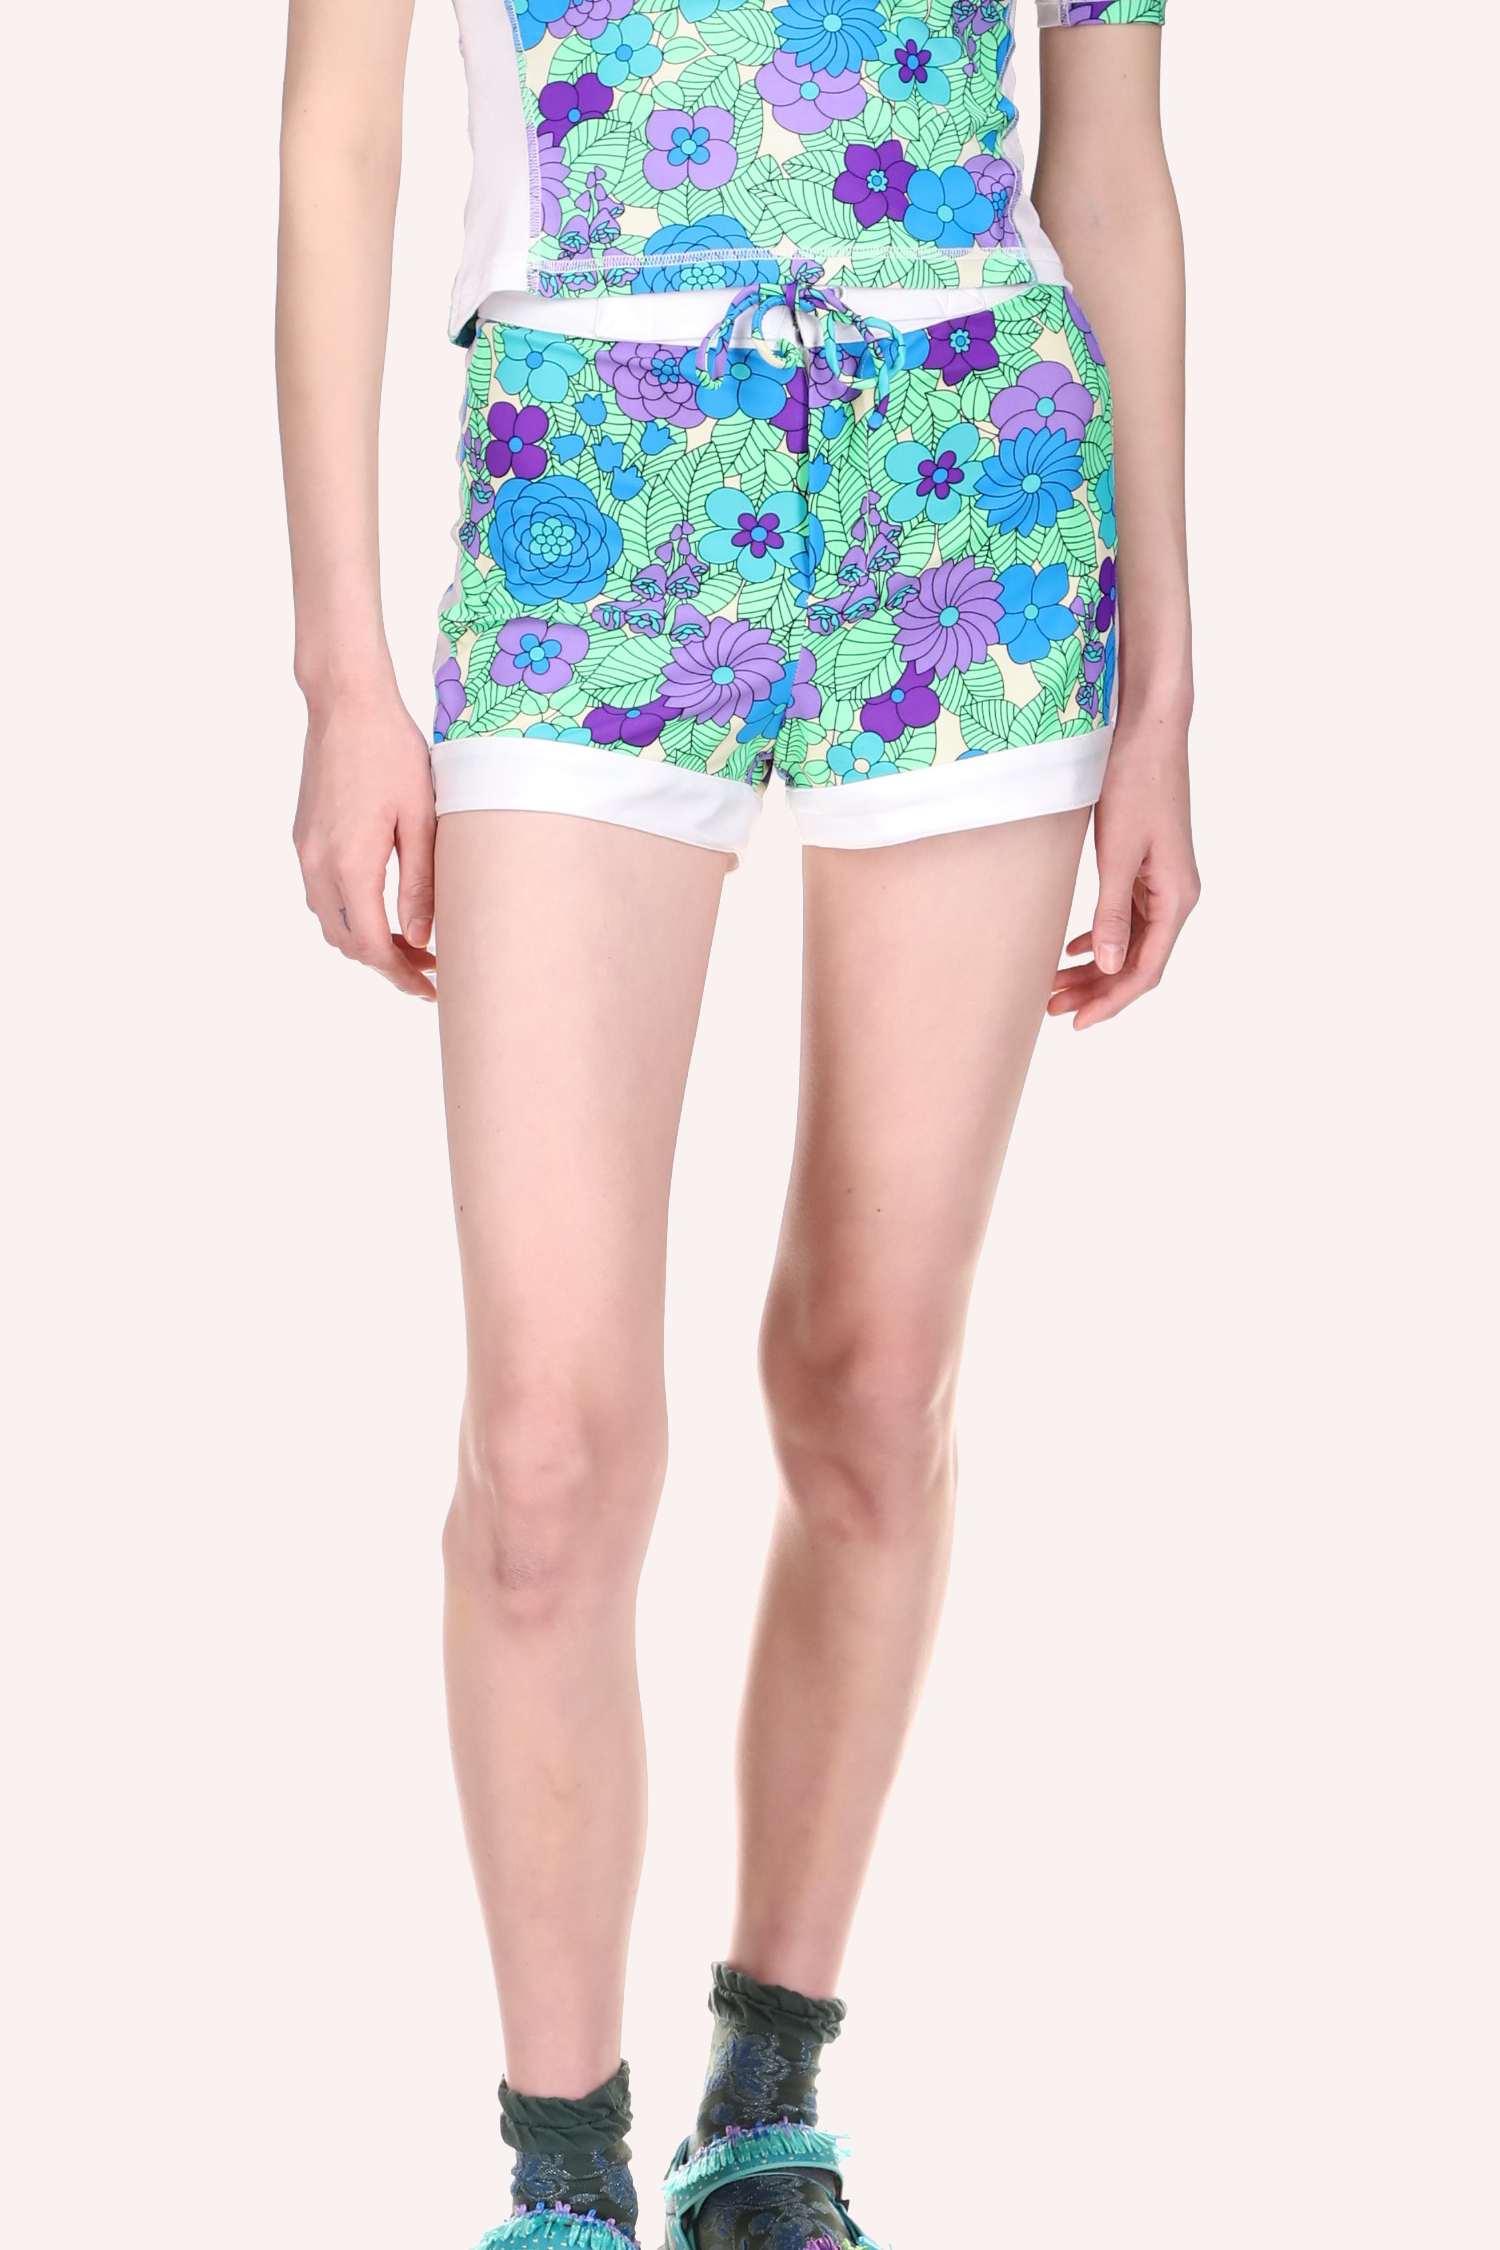 Beckoning Blossoms Surf Shorts, mid tight long, floral design in blue, a white band at bottom hem